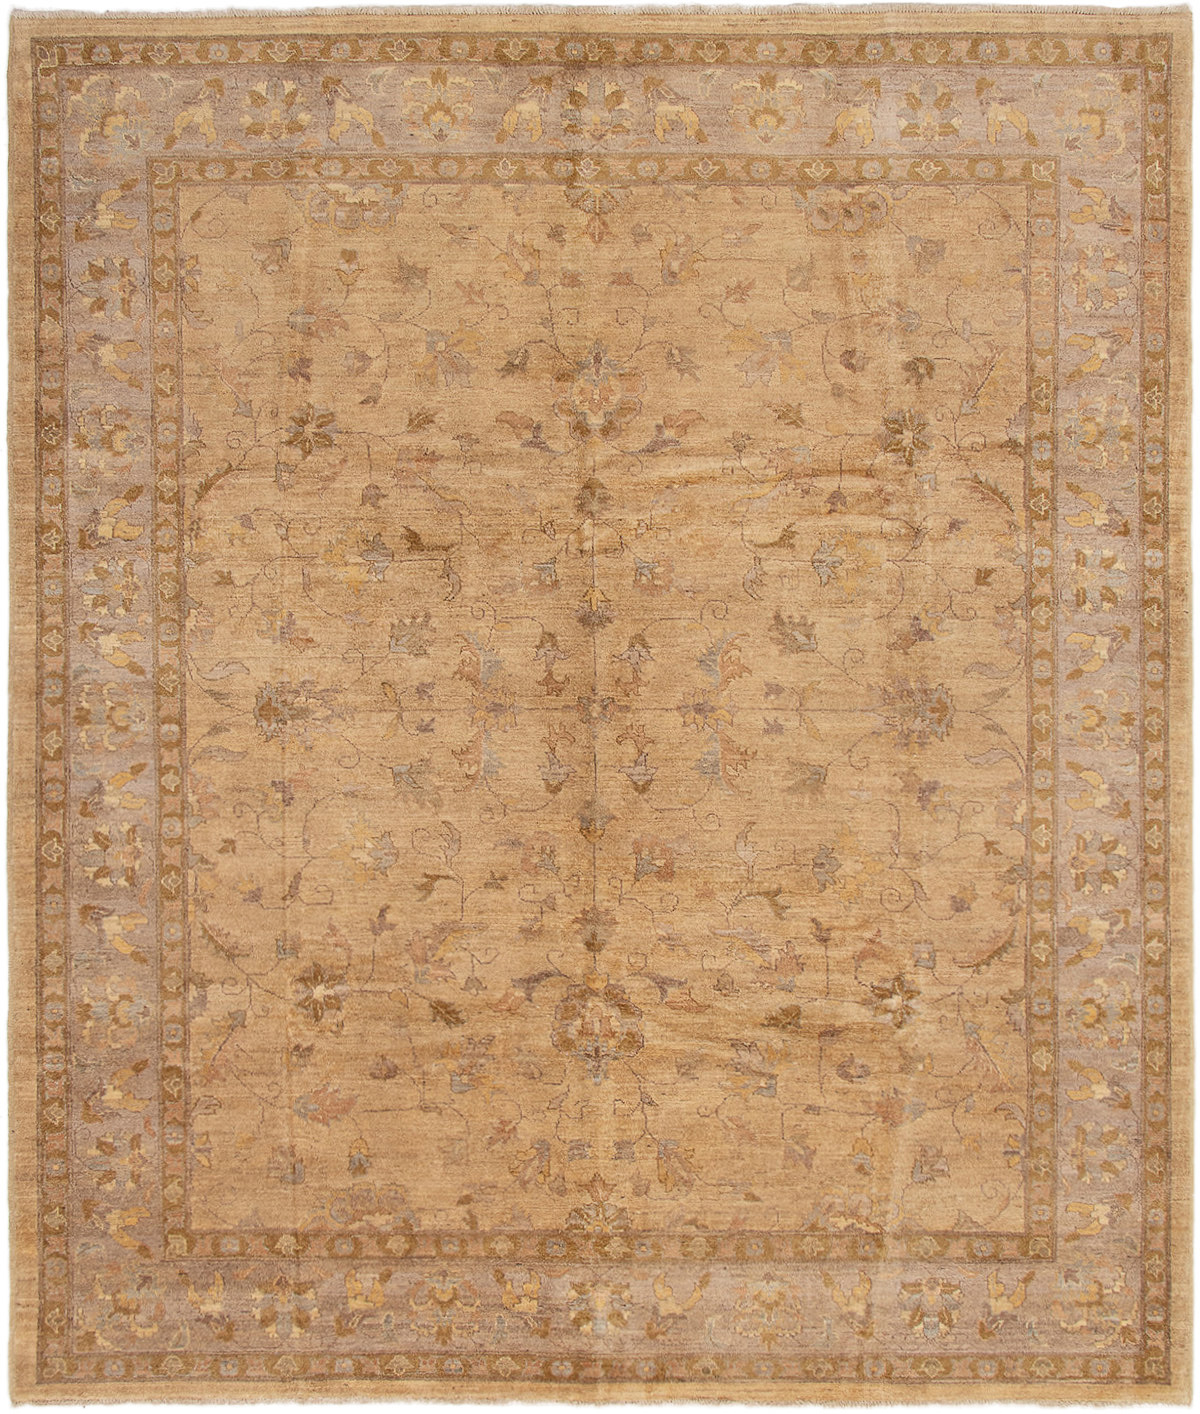 Hand-knotted Chobi Finest Tan Wool Rug 8'0" x 9'8" Size: 8'0" x 9'8"  